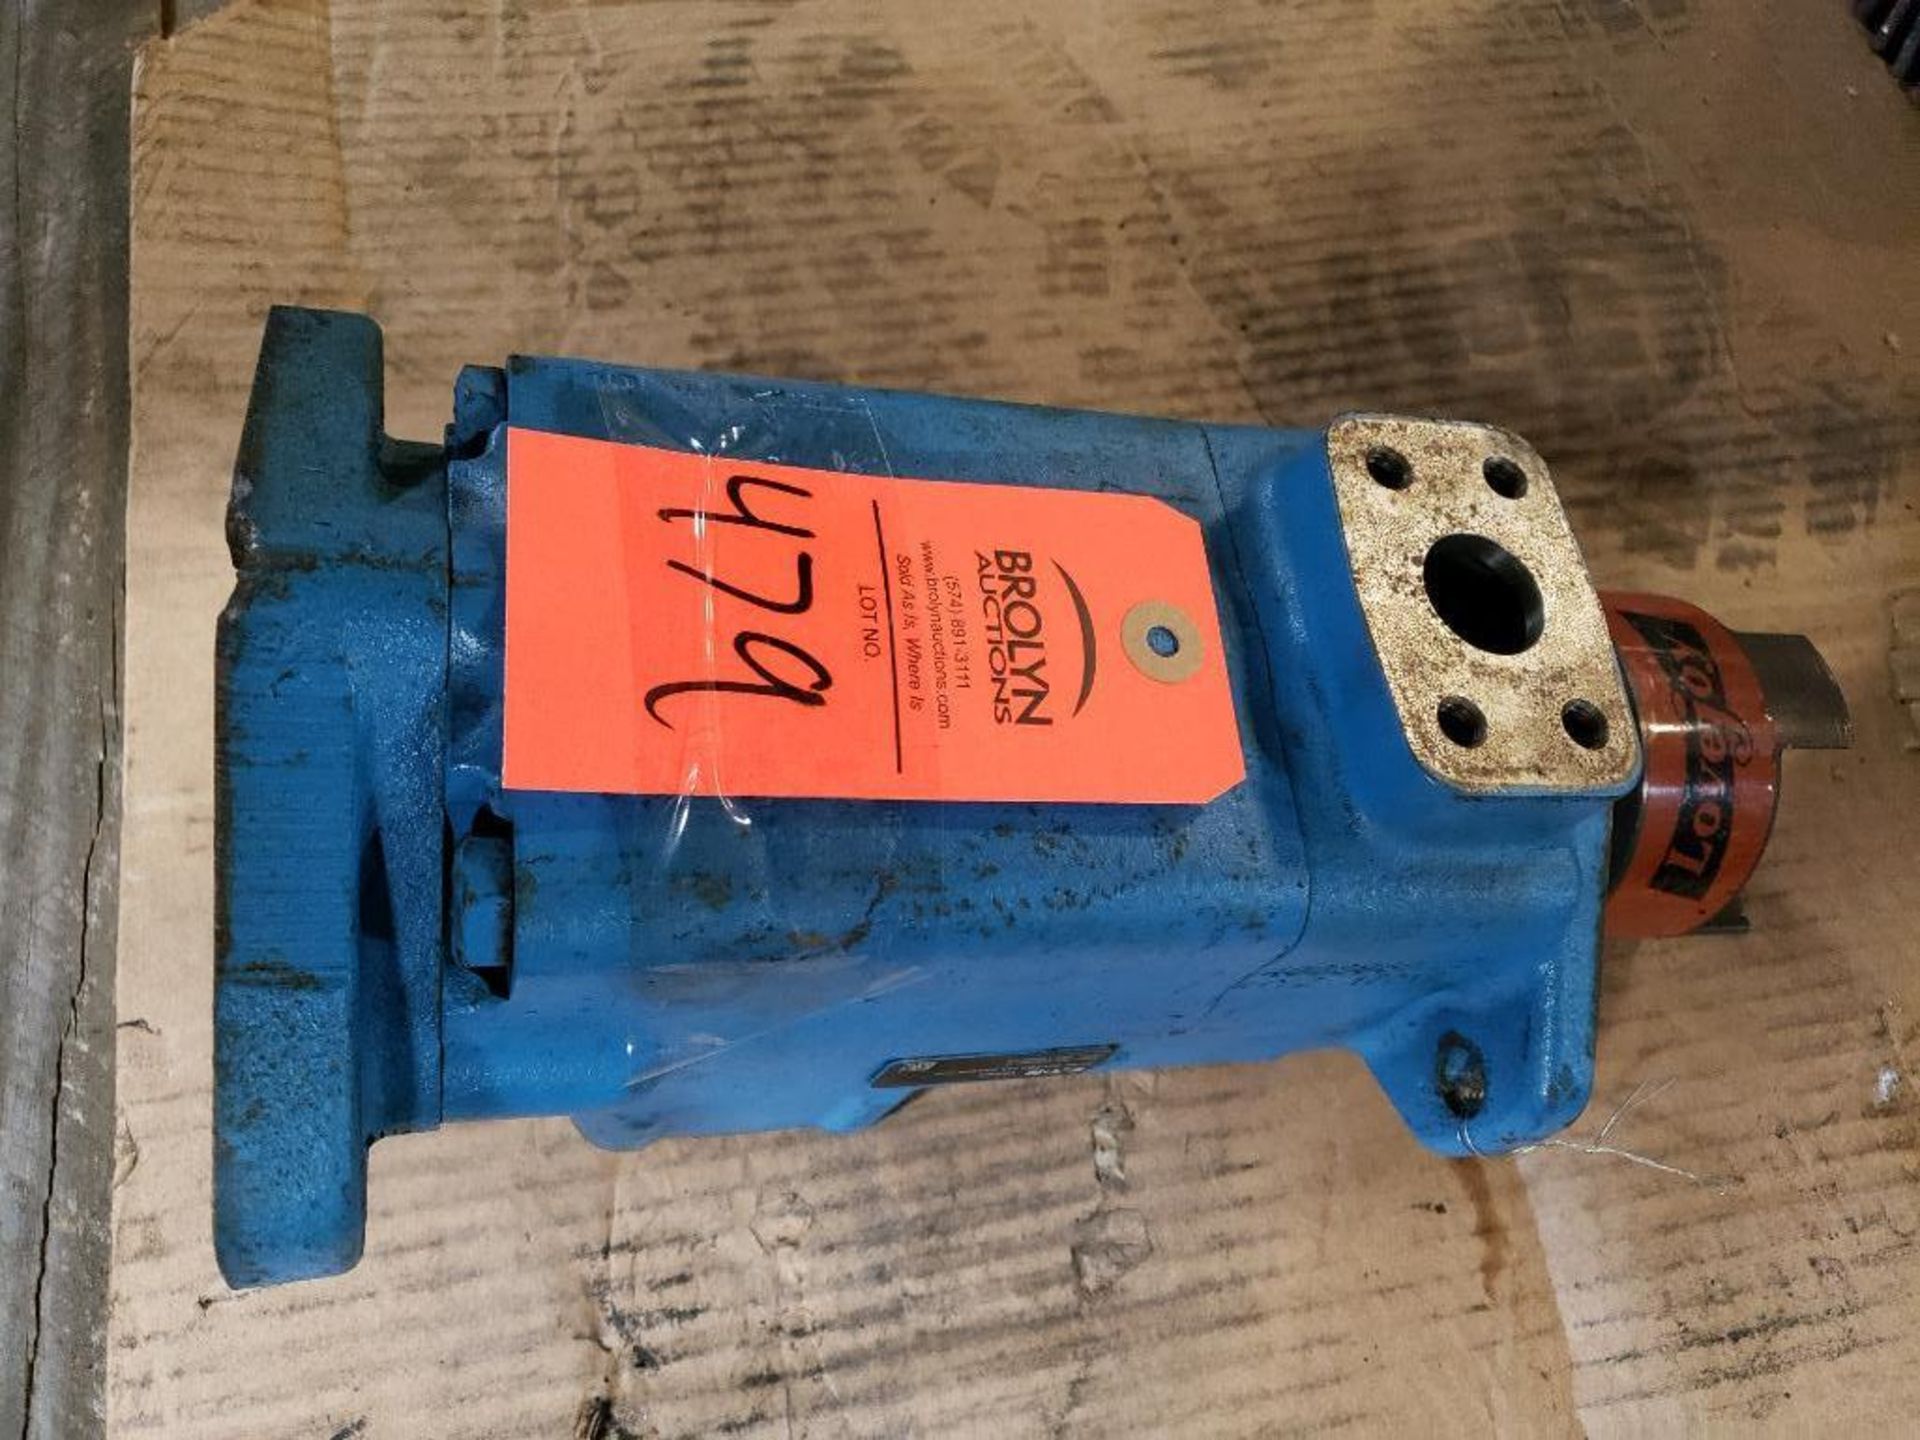 Eaton Vickers 25VTBS12A-2203BB-22R pump assembly.